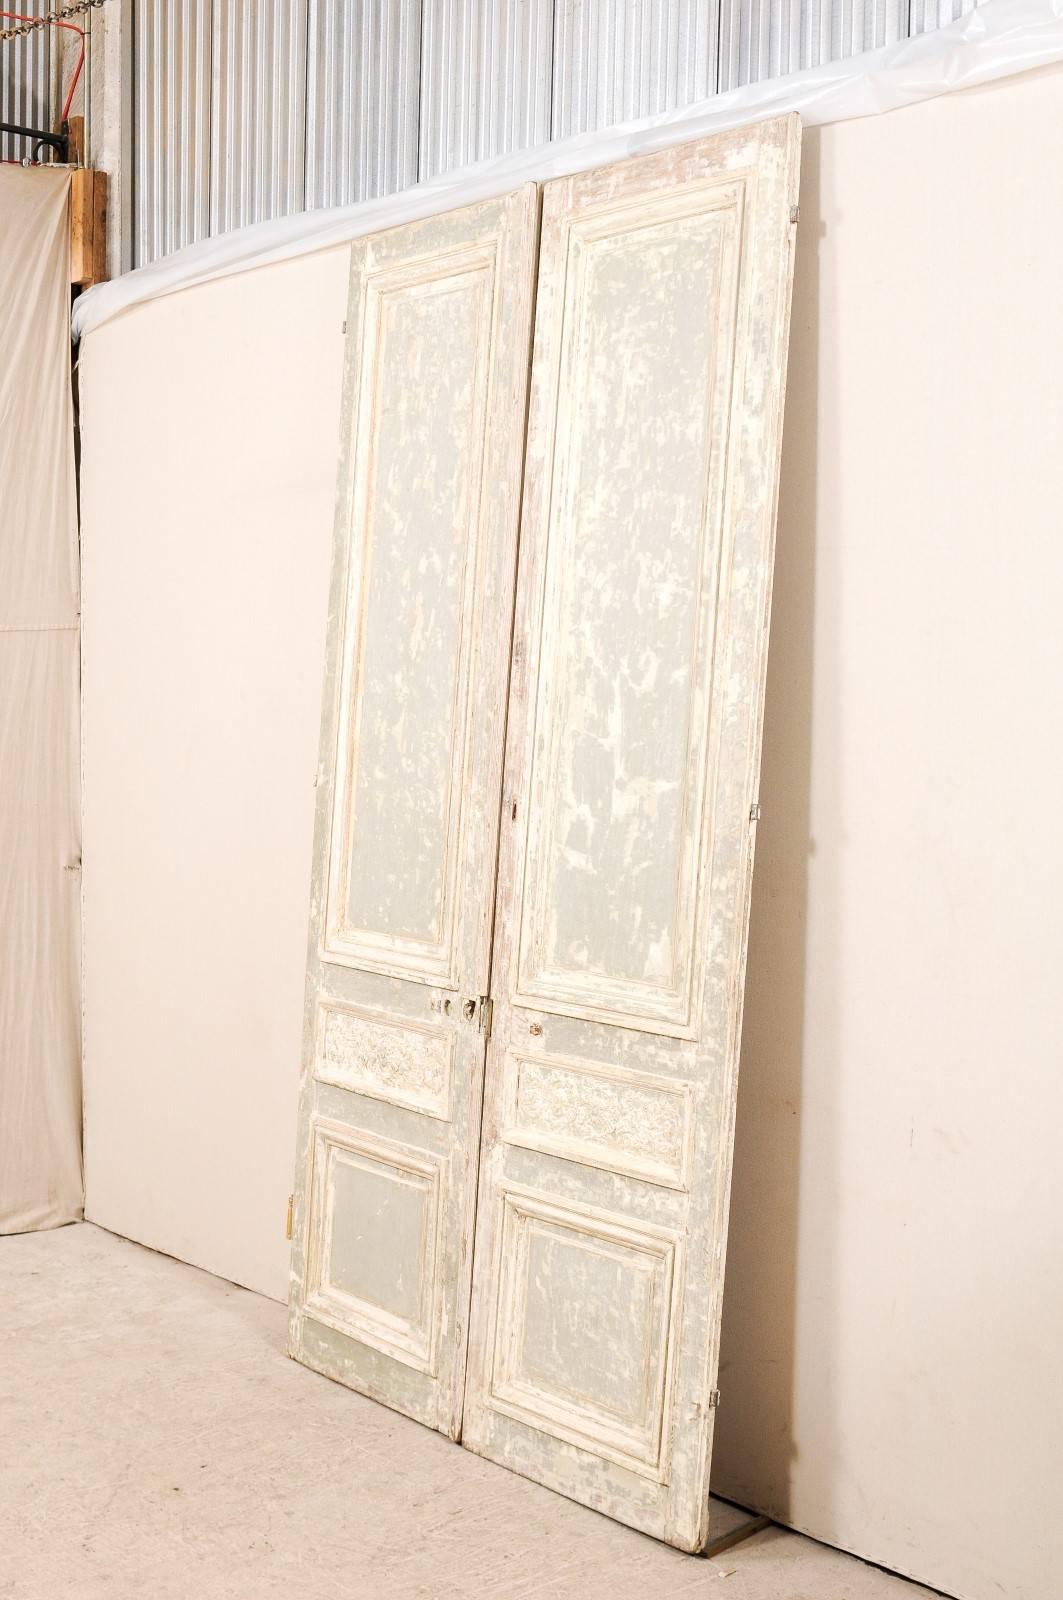 Pair of Tall French Doors with Scraped Paint Finish in Light Grey and Cream 1